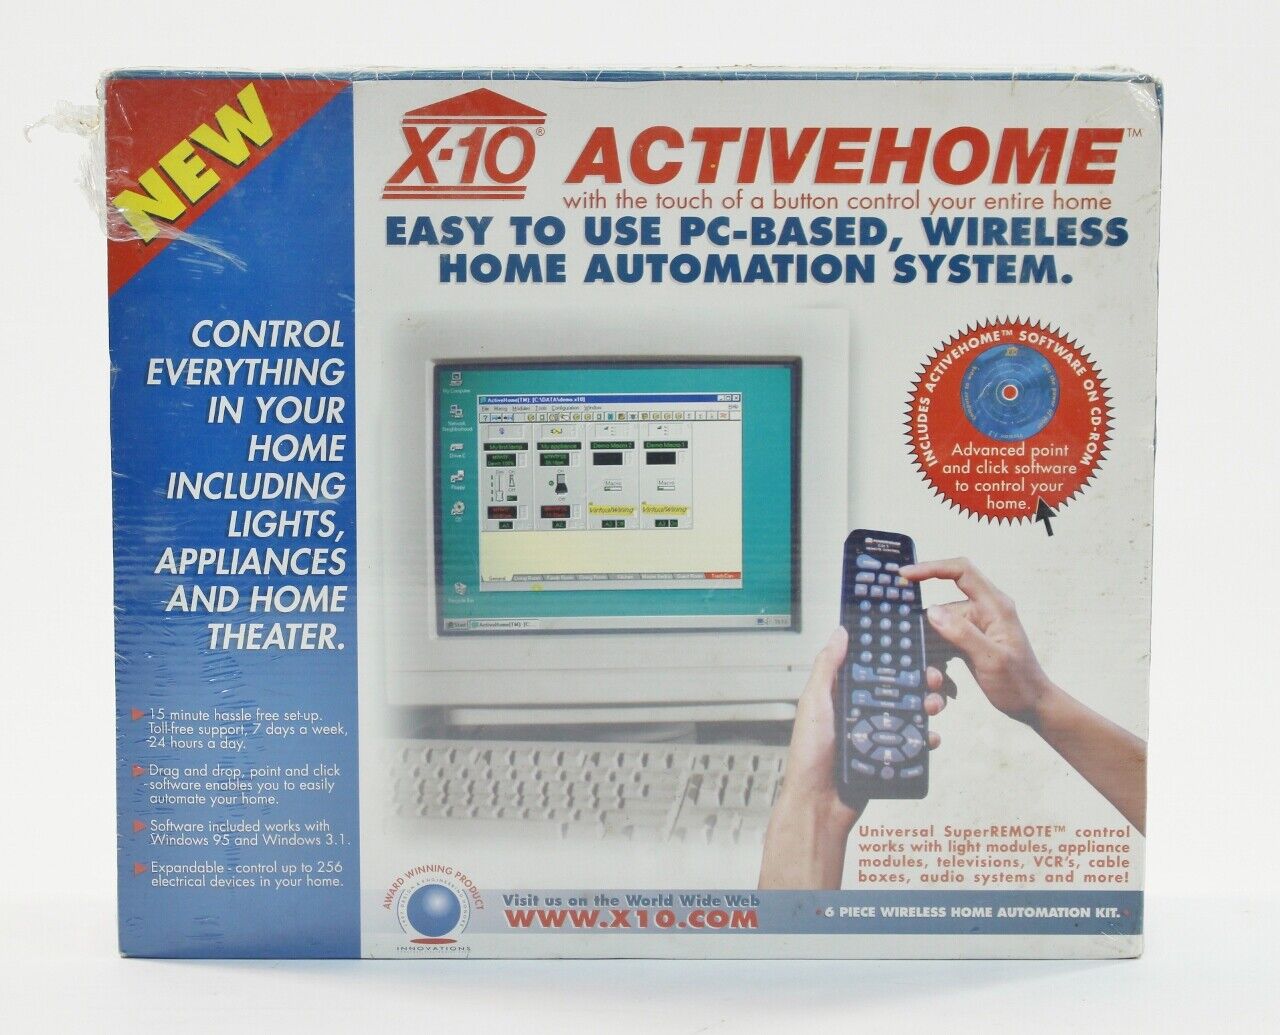 VTG 90s Sealed X10 Activehome Computer Controlled Smart Home Automation System